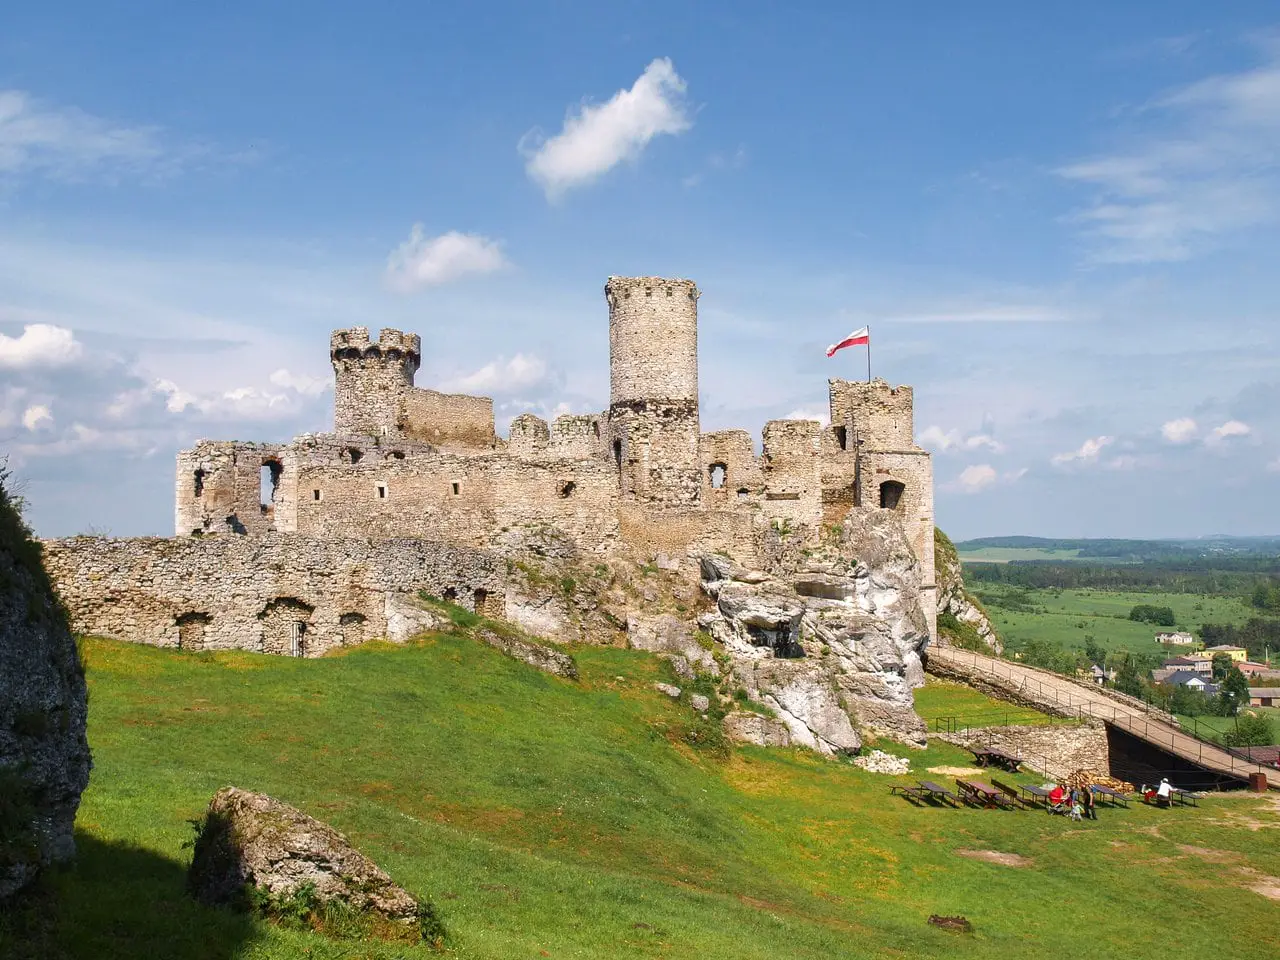 Ogrodzieniec Castle, one of the best castles in Poland